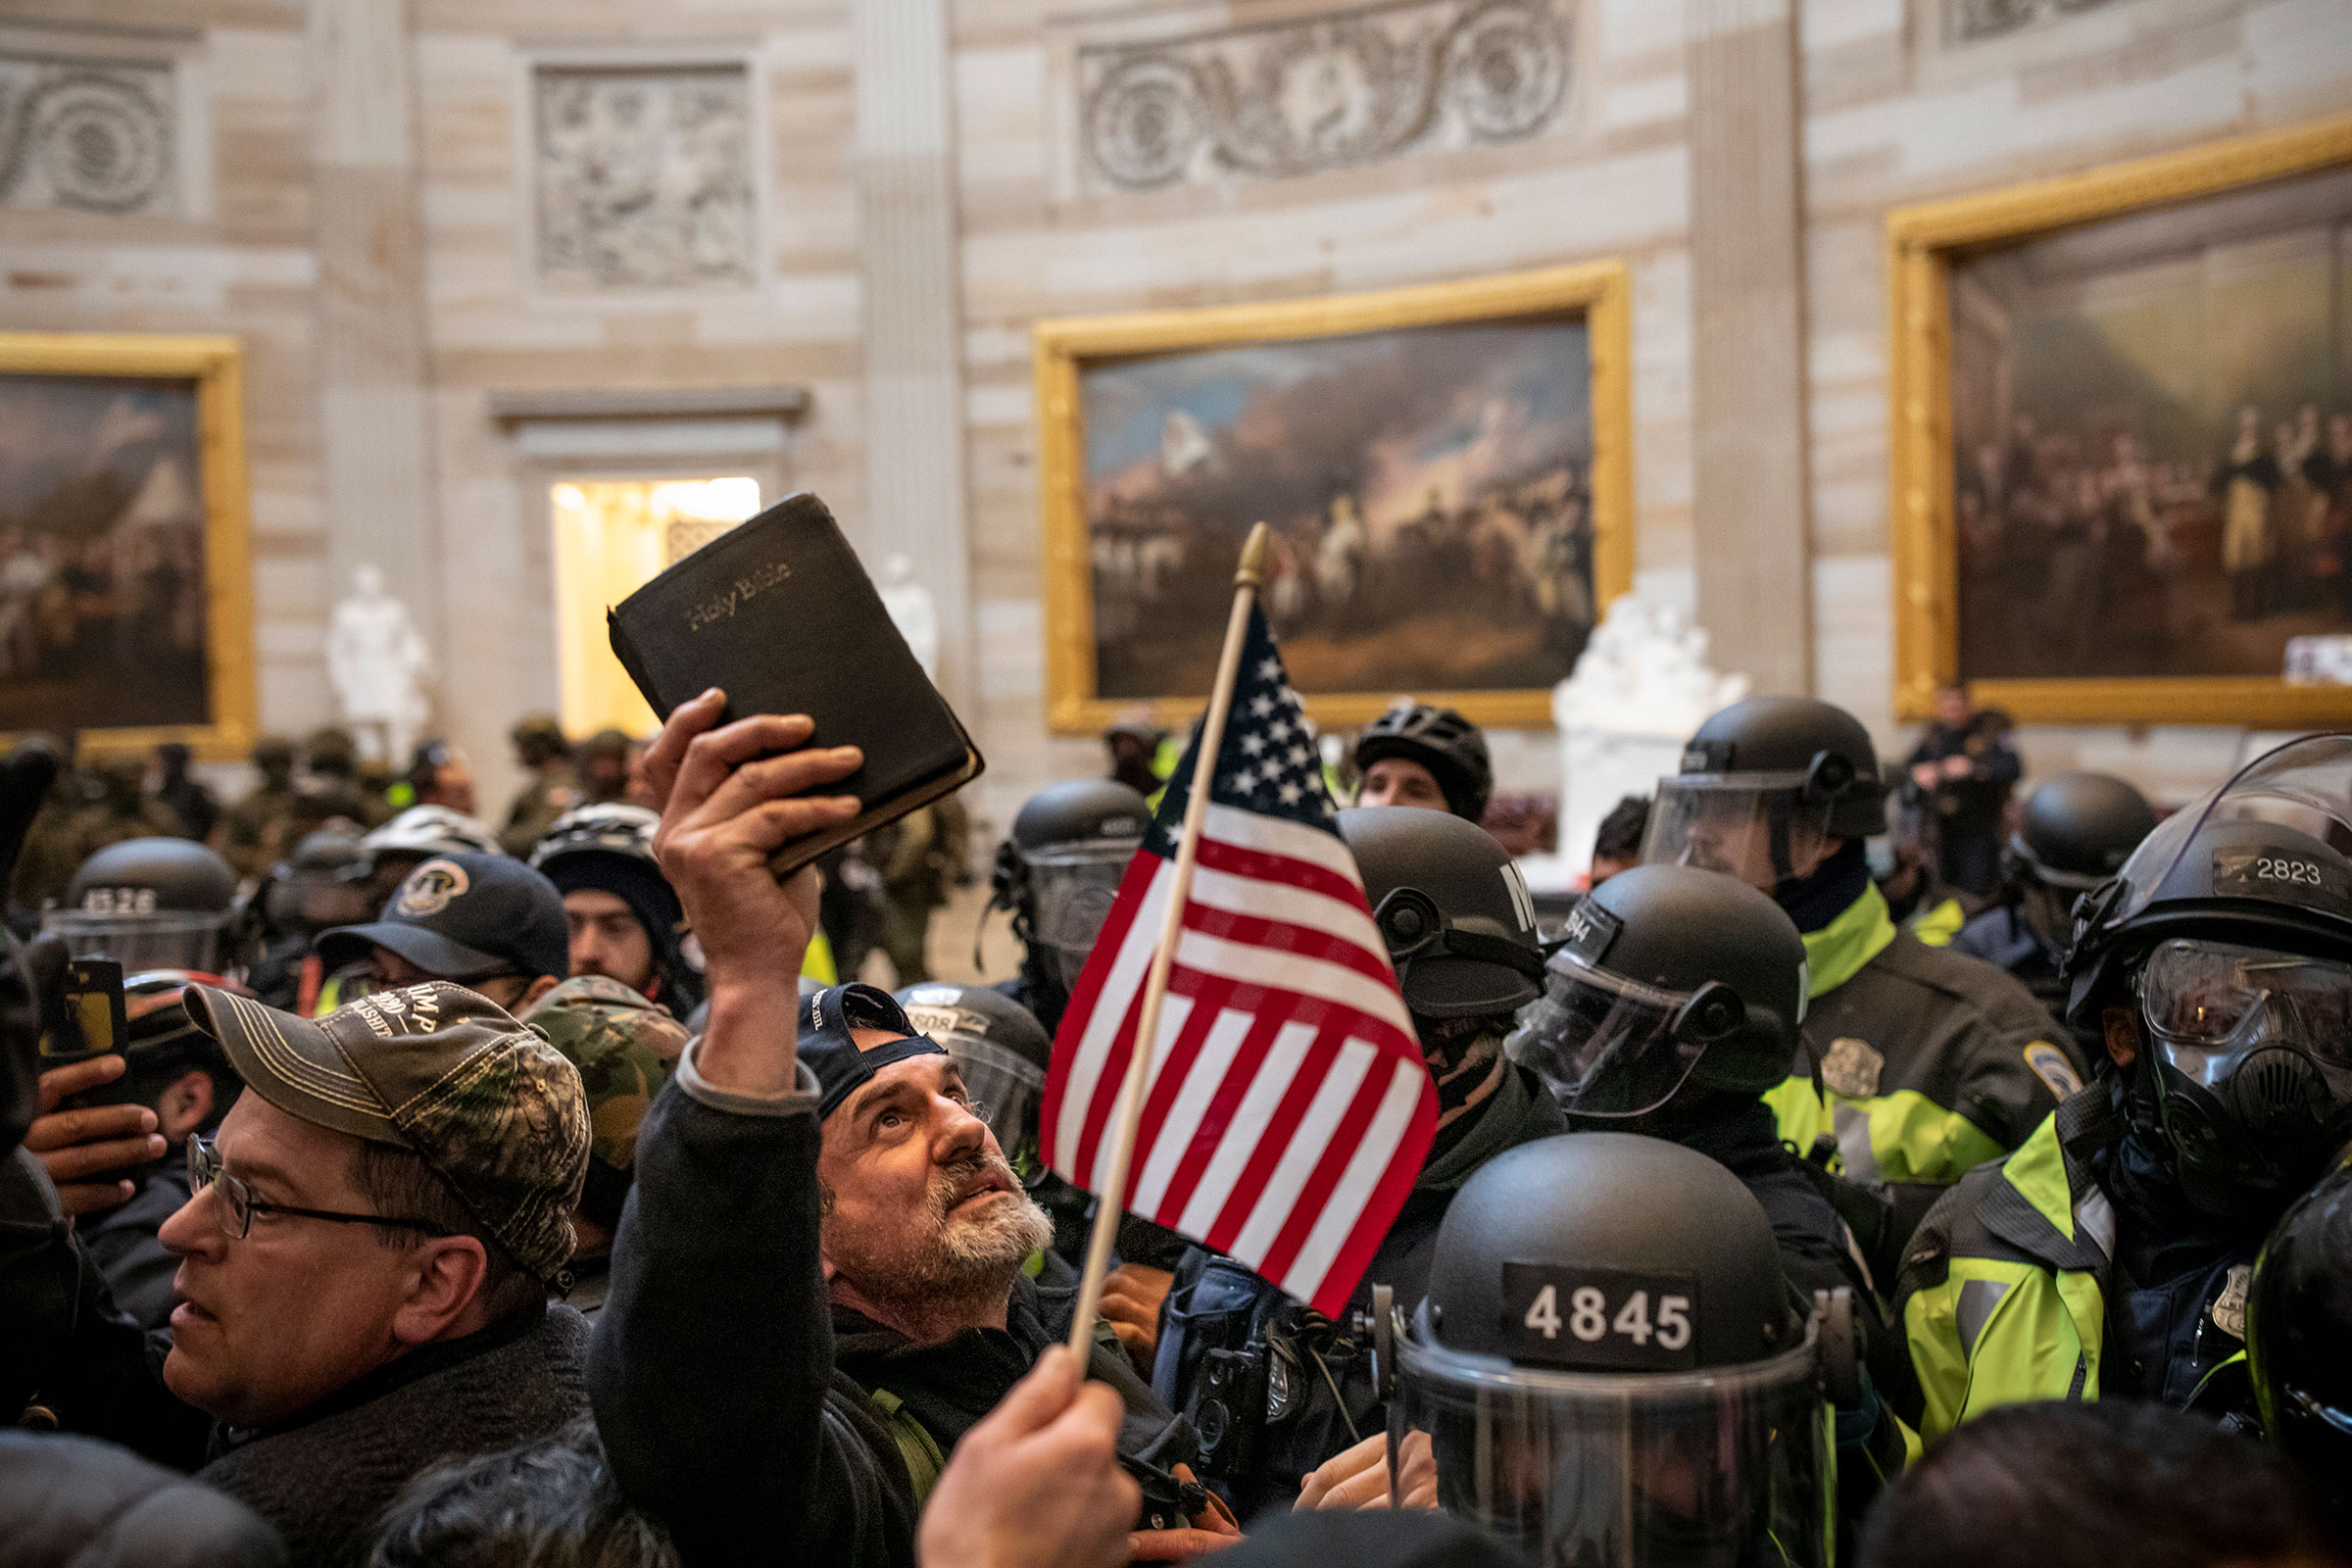 Protesters storm the Rotunda, inside the Capitol in Washington, after listening to a speech by President Trump on Jan. 6, 2021. (Ashley Gilbertson—VII/Redux)